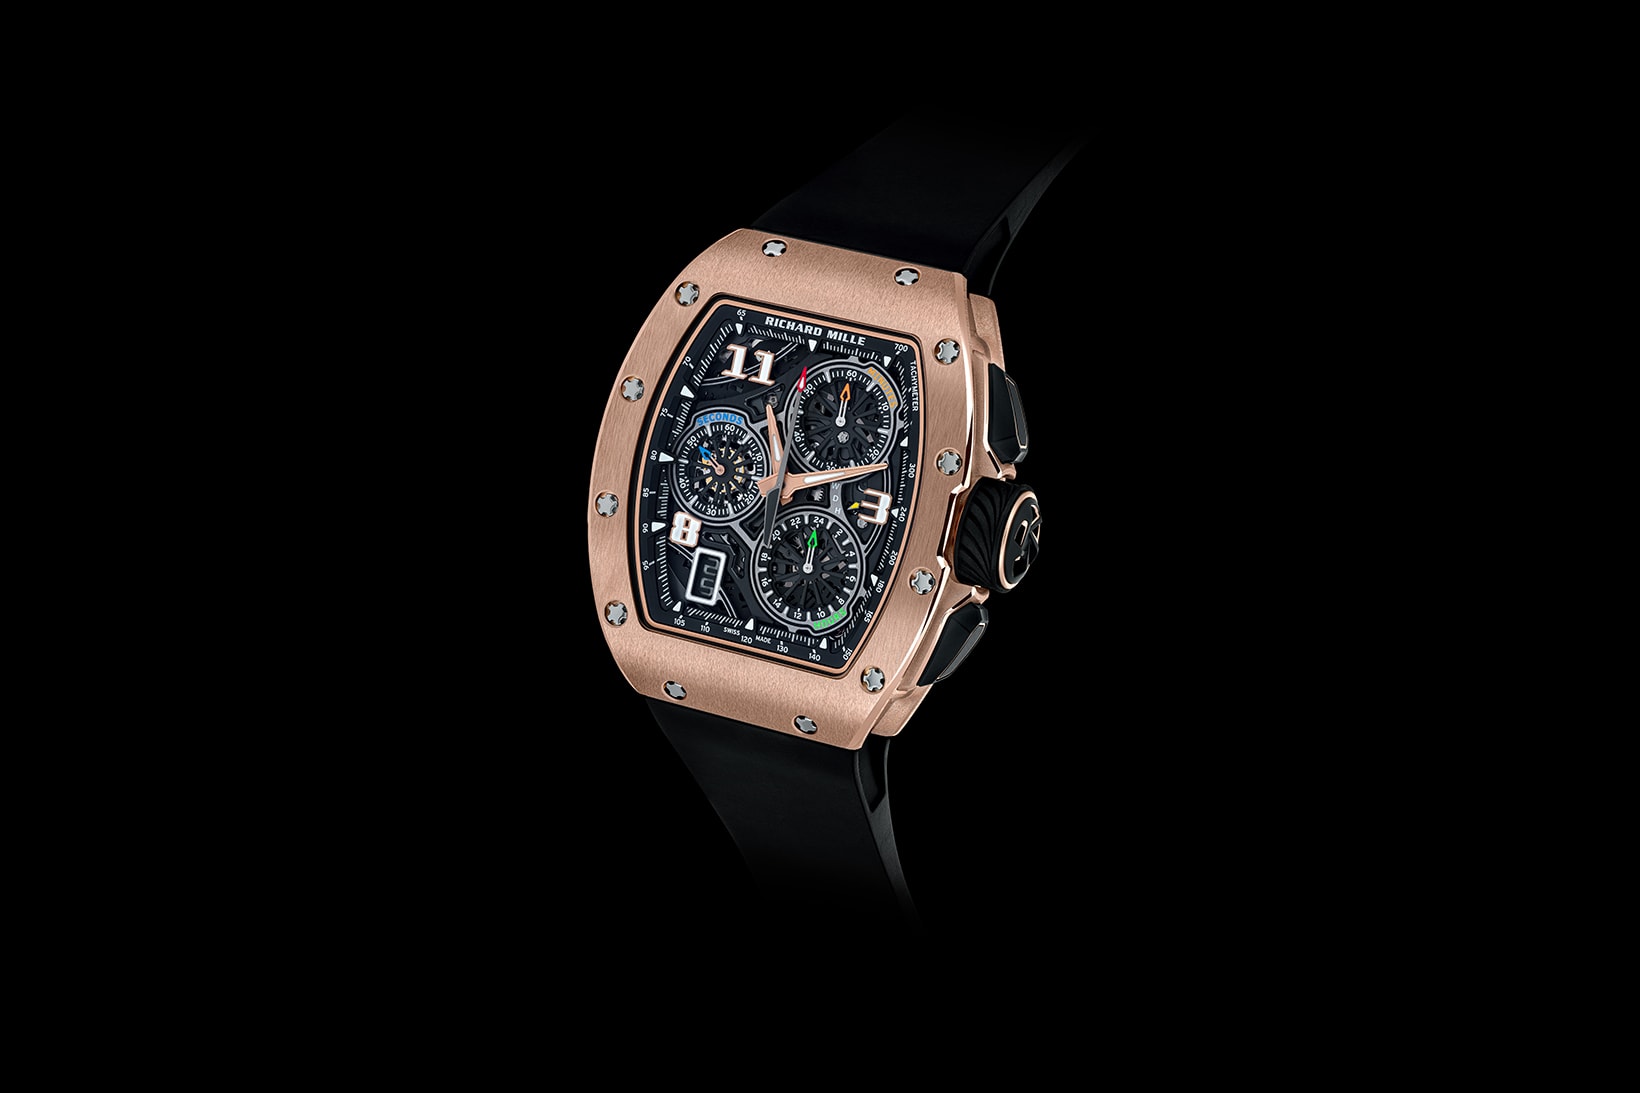 Richard Mille Announces RM 72-01 Lifestyle Automatic Chronograph Swiss Watchmaking Luxury Timepiece 